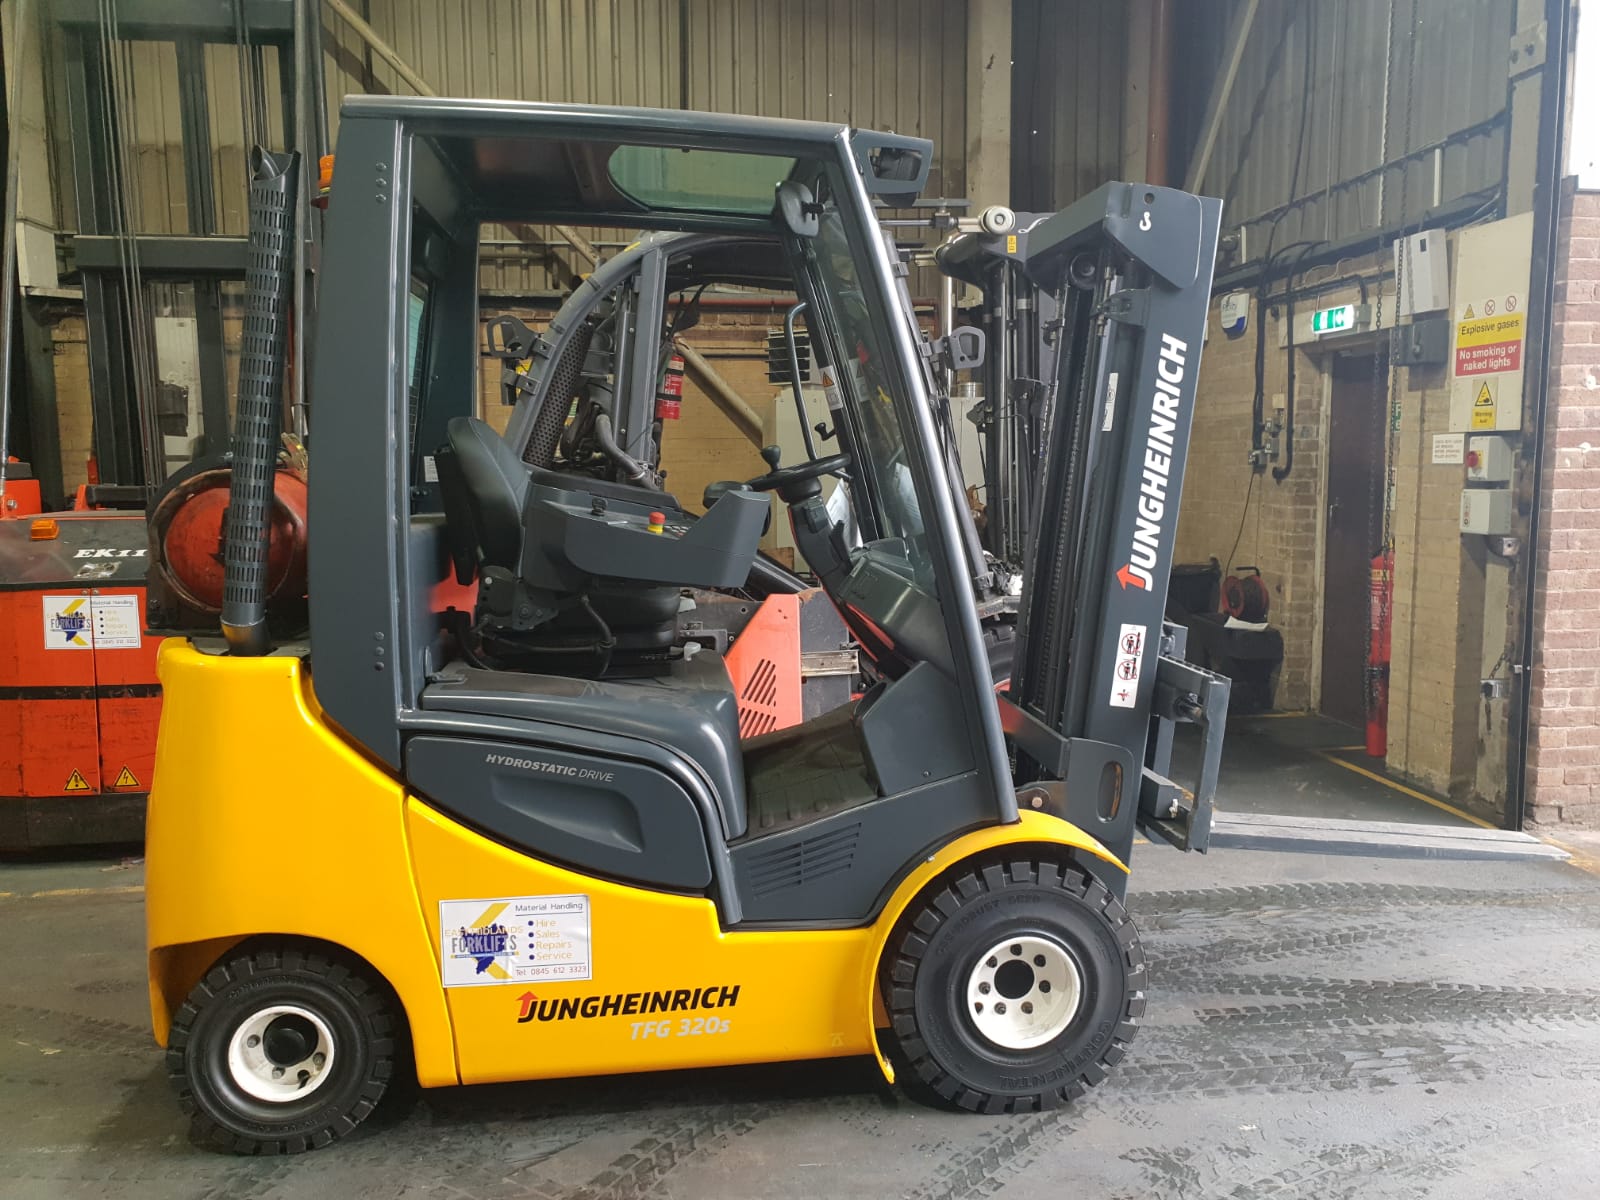 Free Renewal Thorough Examination With Every Used Forklift Sale East Midlands Forklifts